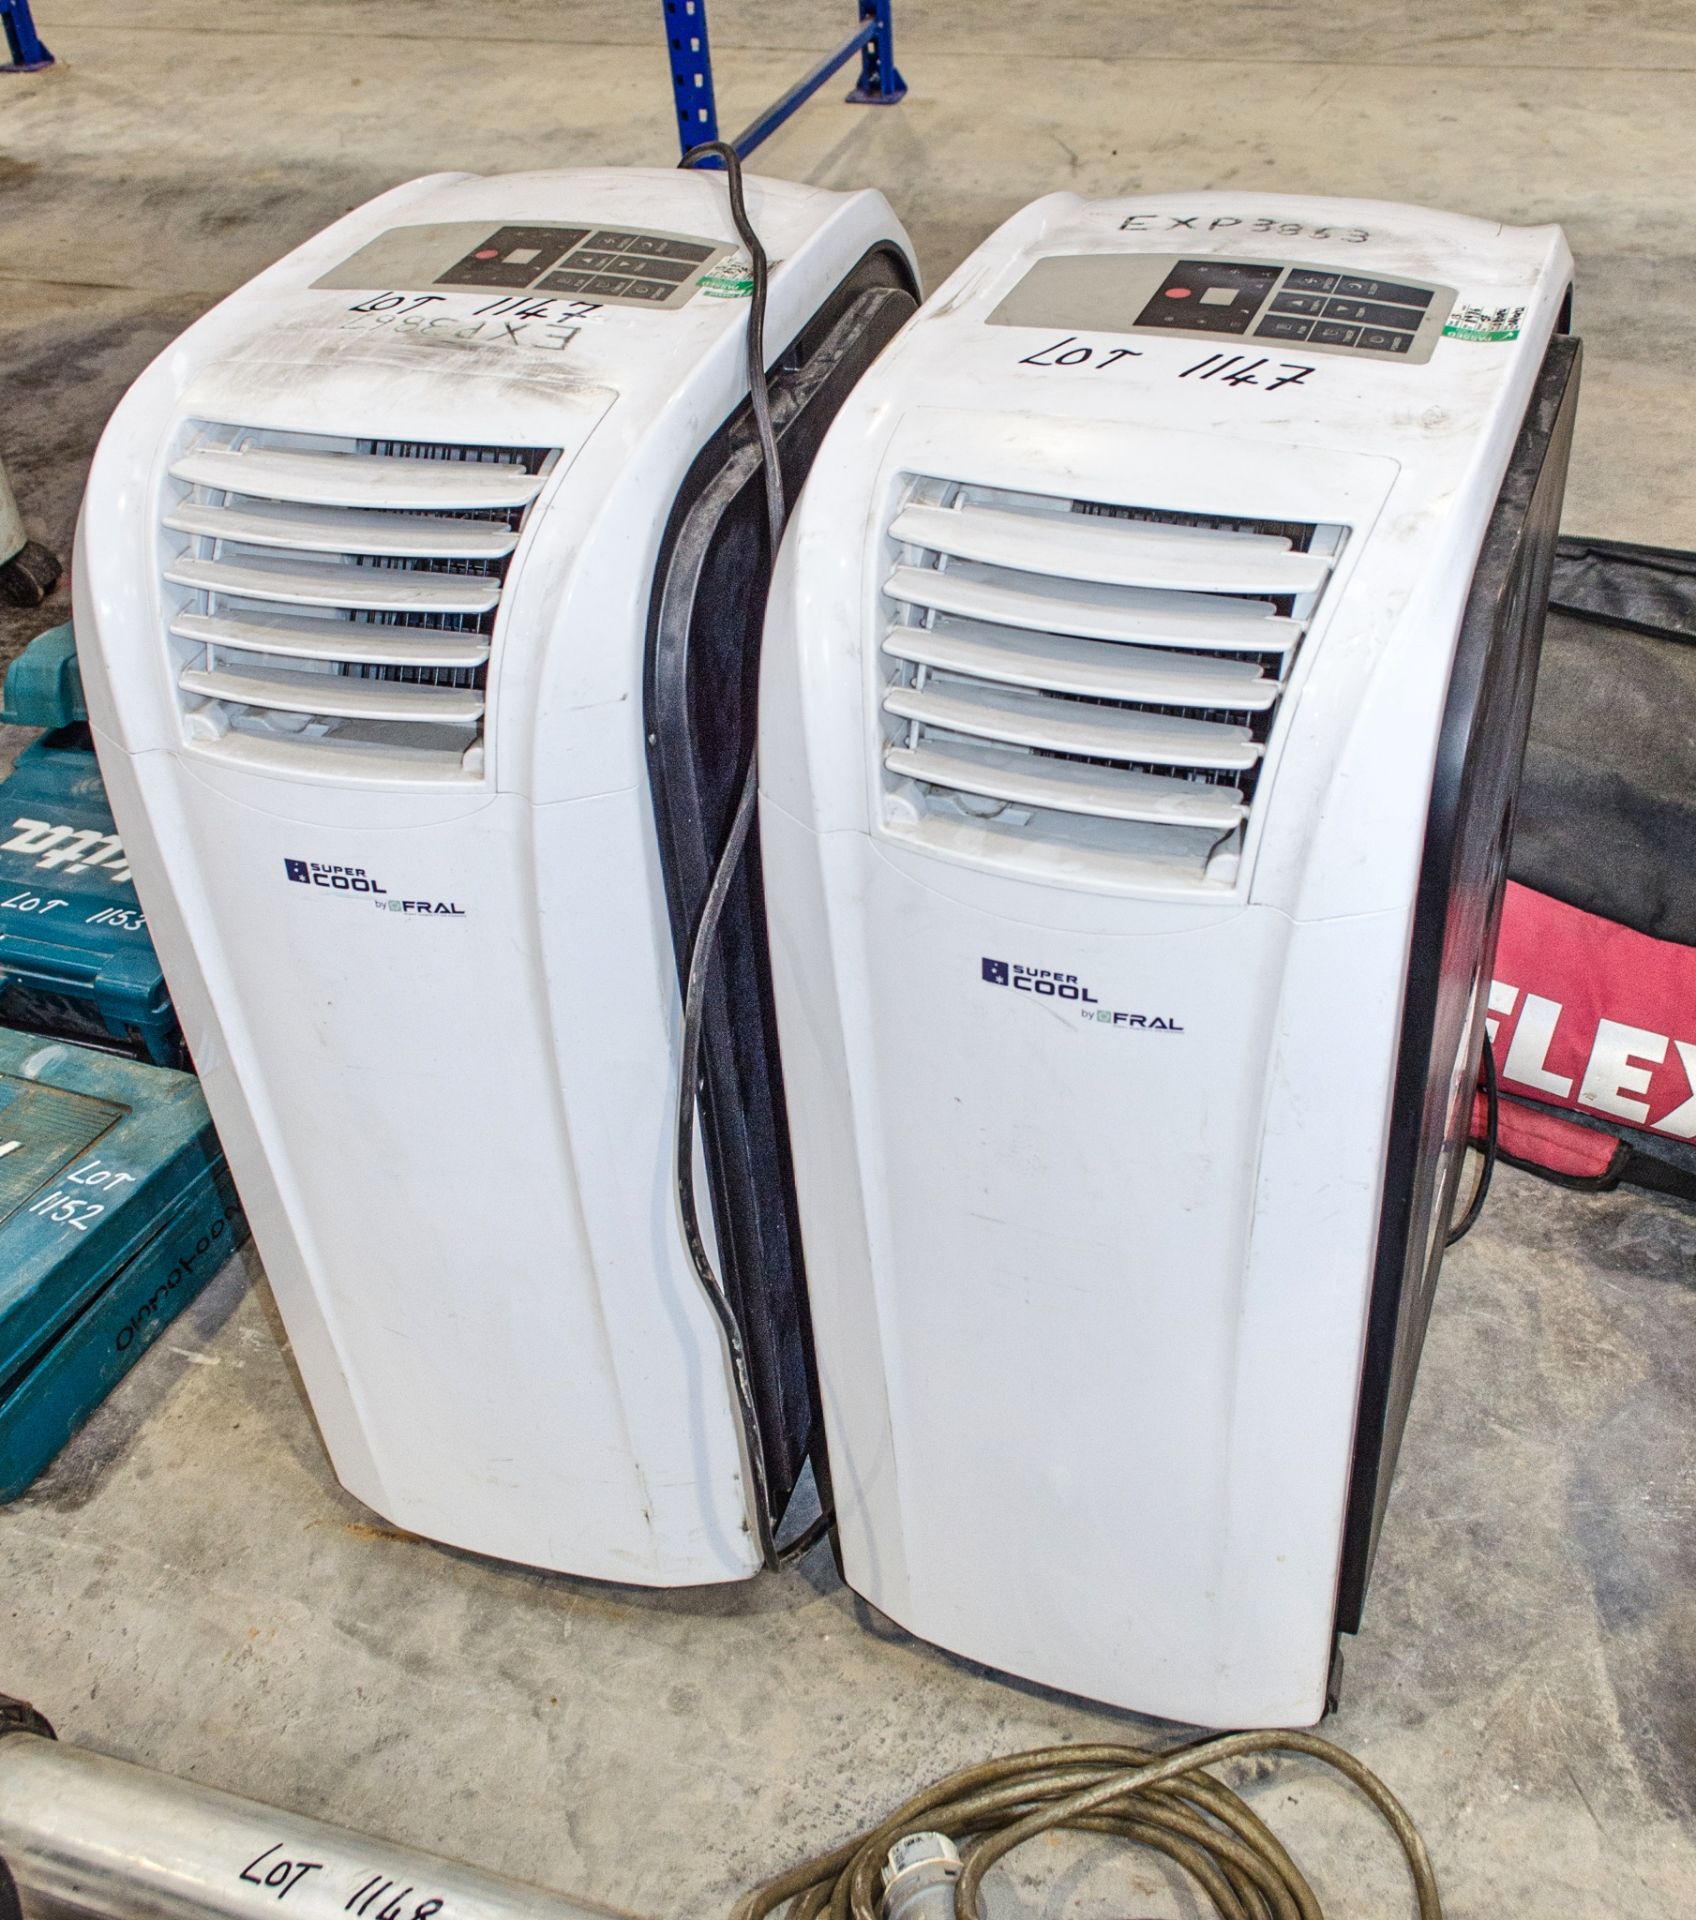 2 - Fral Super Cool 240v air conditioning units EXP3867, EXP3863